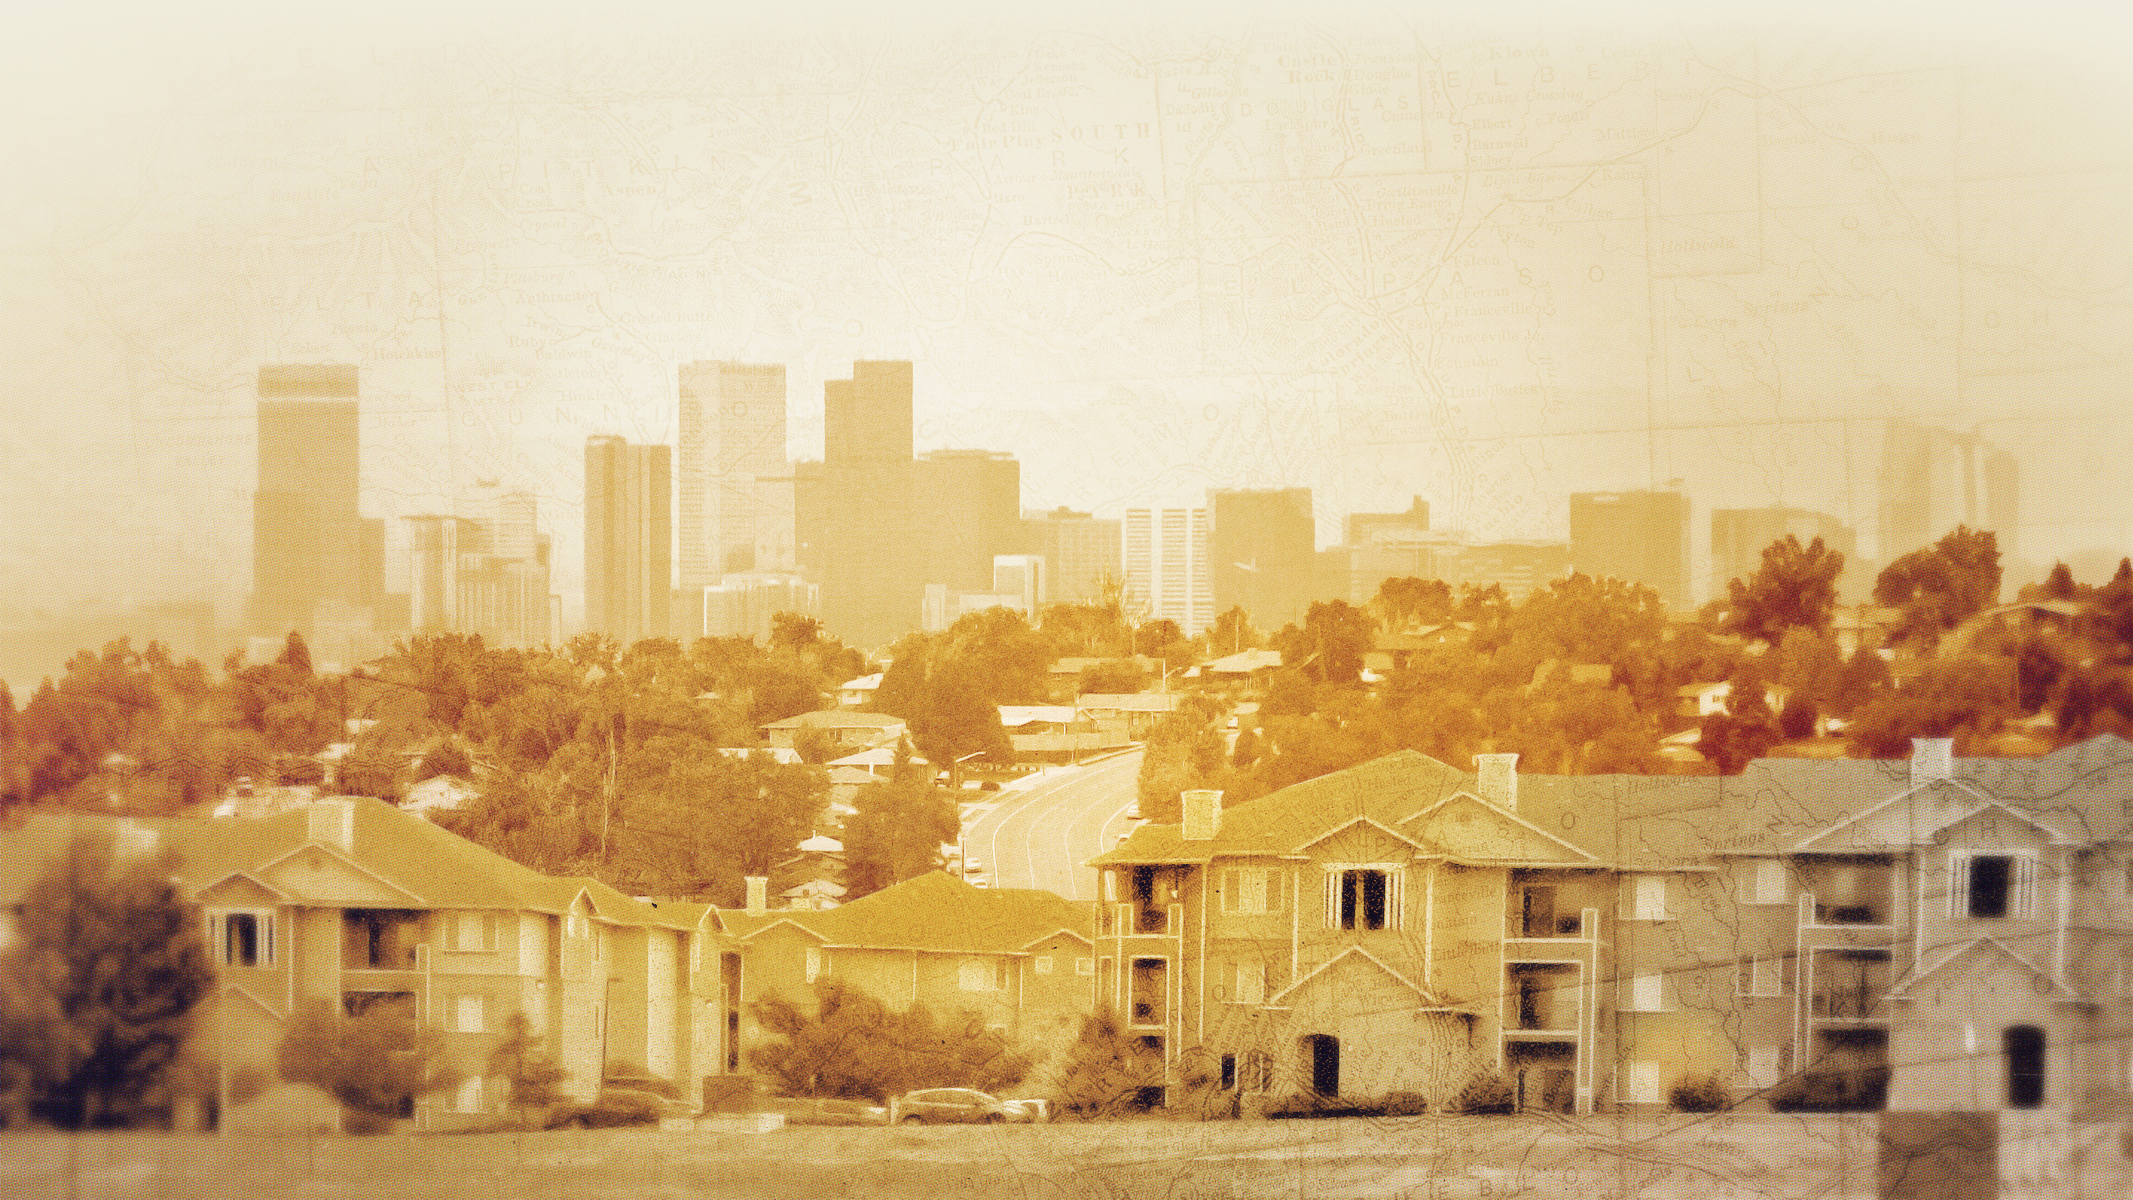 A sepia-toned photo of residential buildings showcases the blend of suburban and urban environments, hinting at the intricacies of housing market prices.